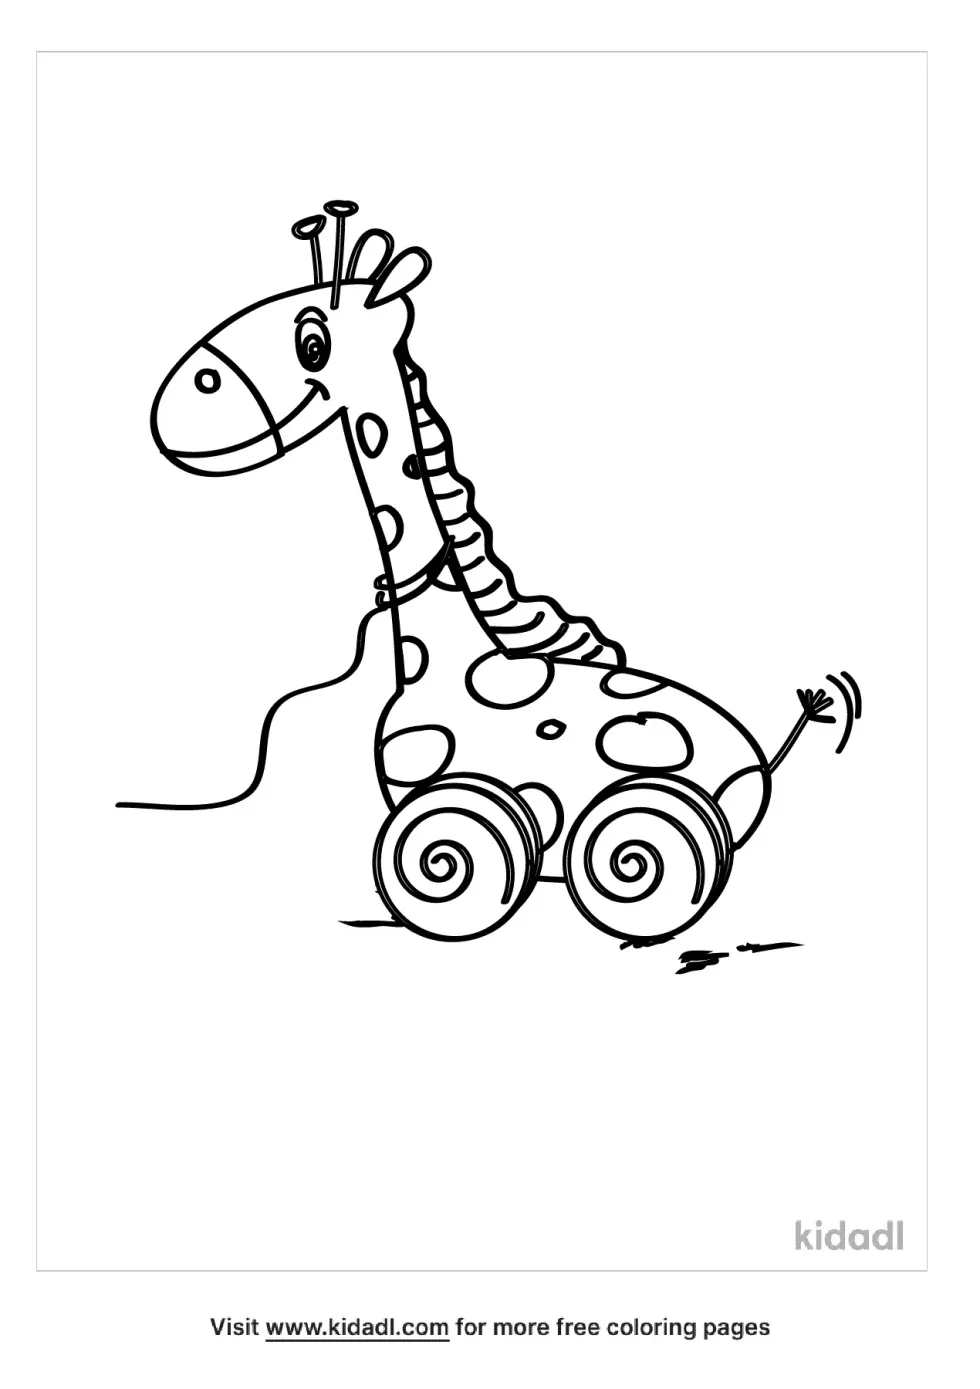 Giraffe Pull Toy Coloring Page